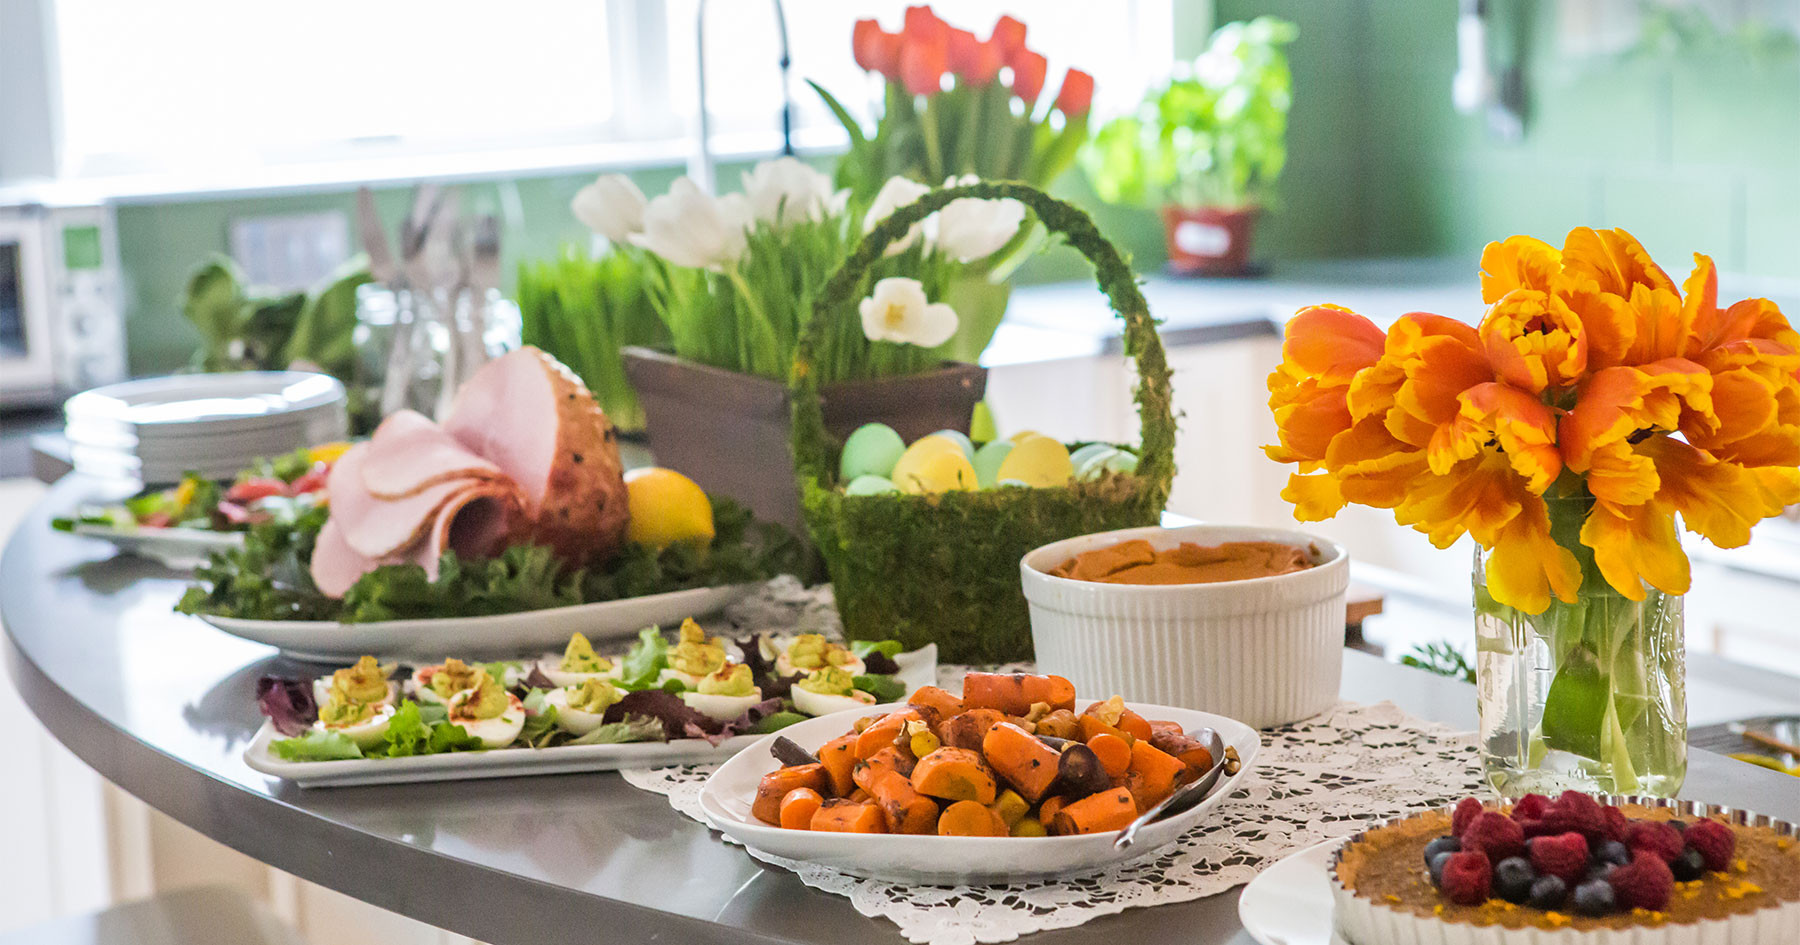 Easter Dinner Catering
 Chains jockey for heat and eat Easter sales